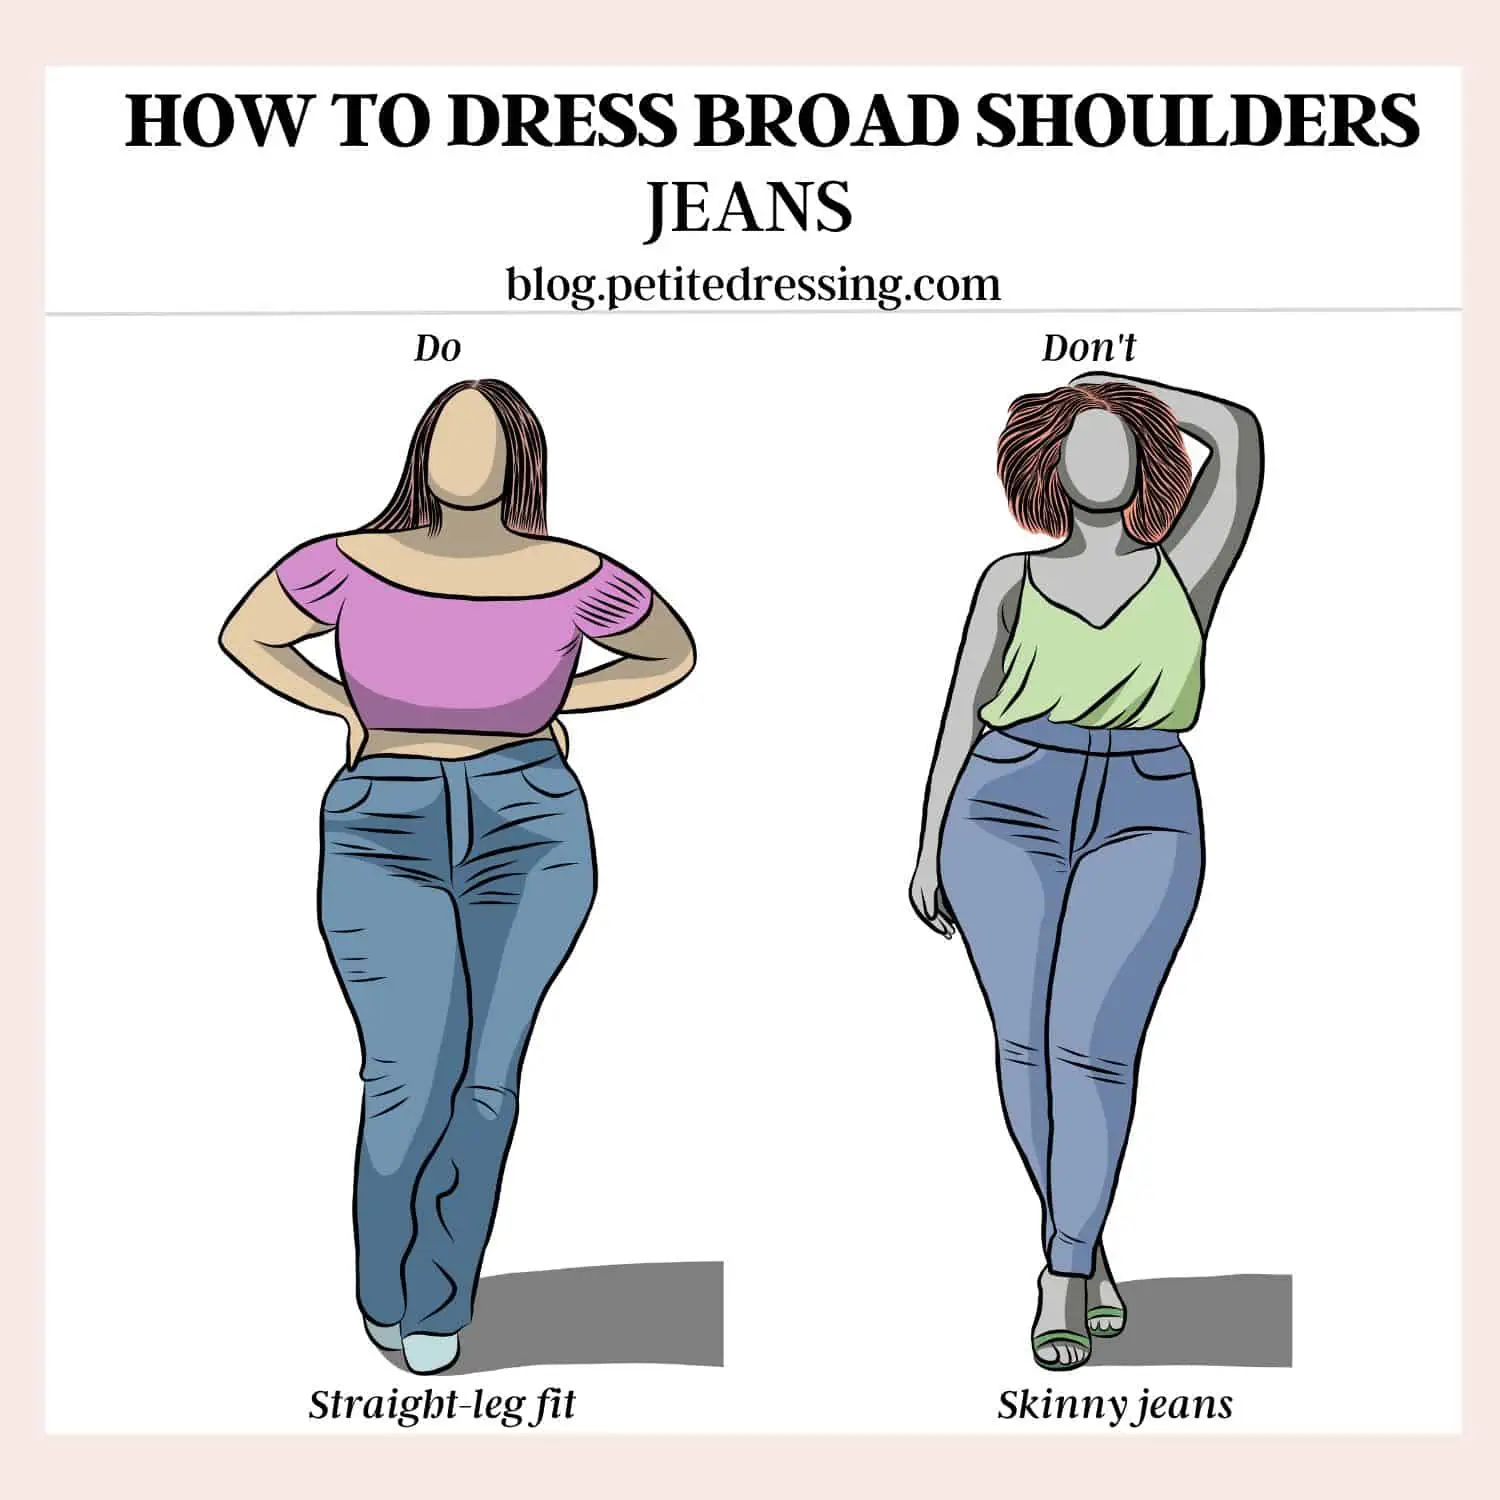 How To Hide Broad Shoulders Many women, especially who have an